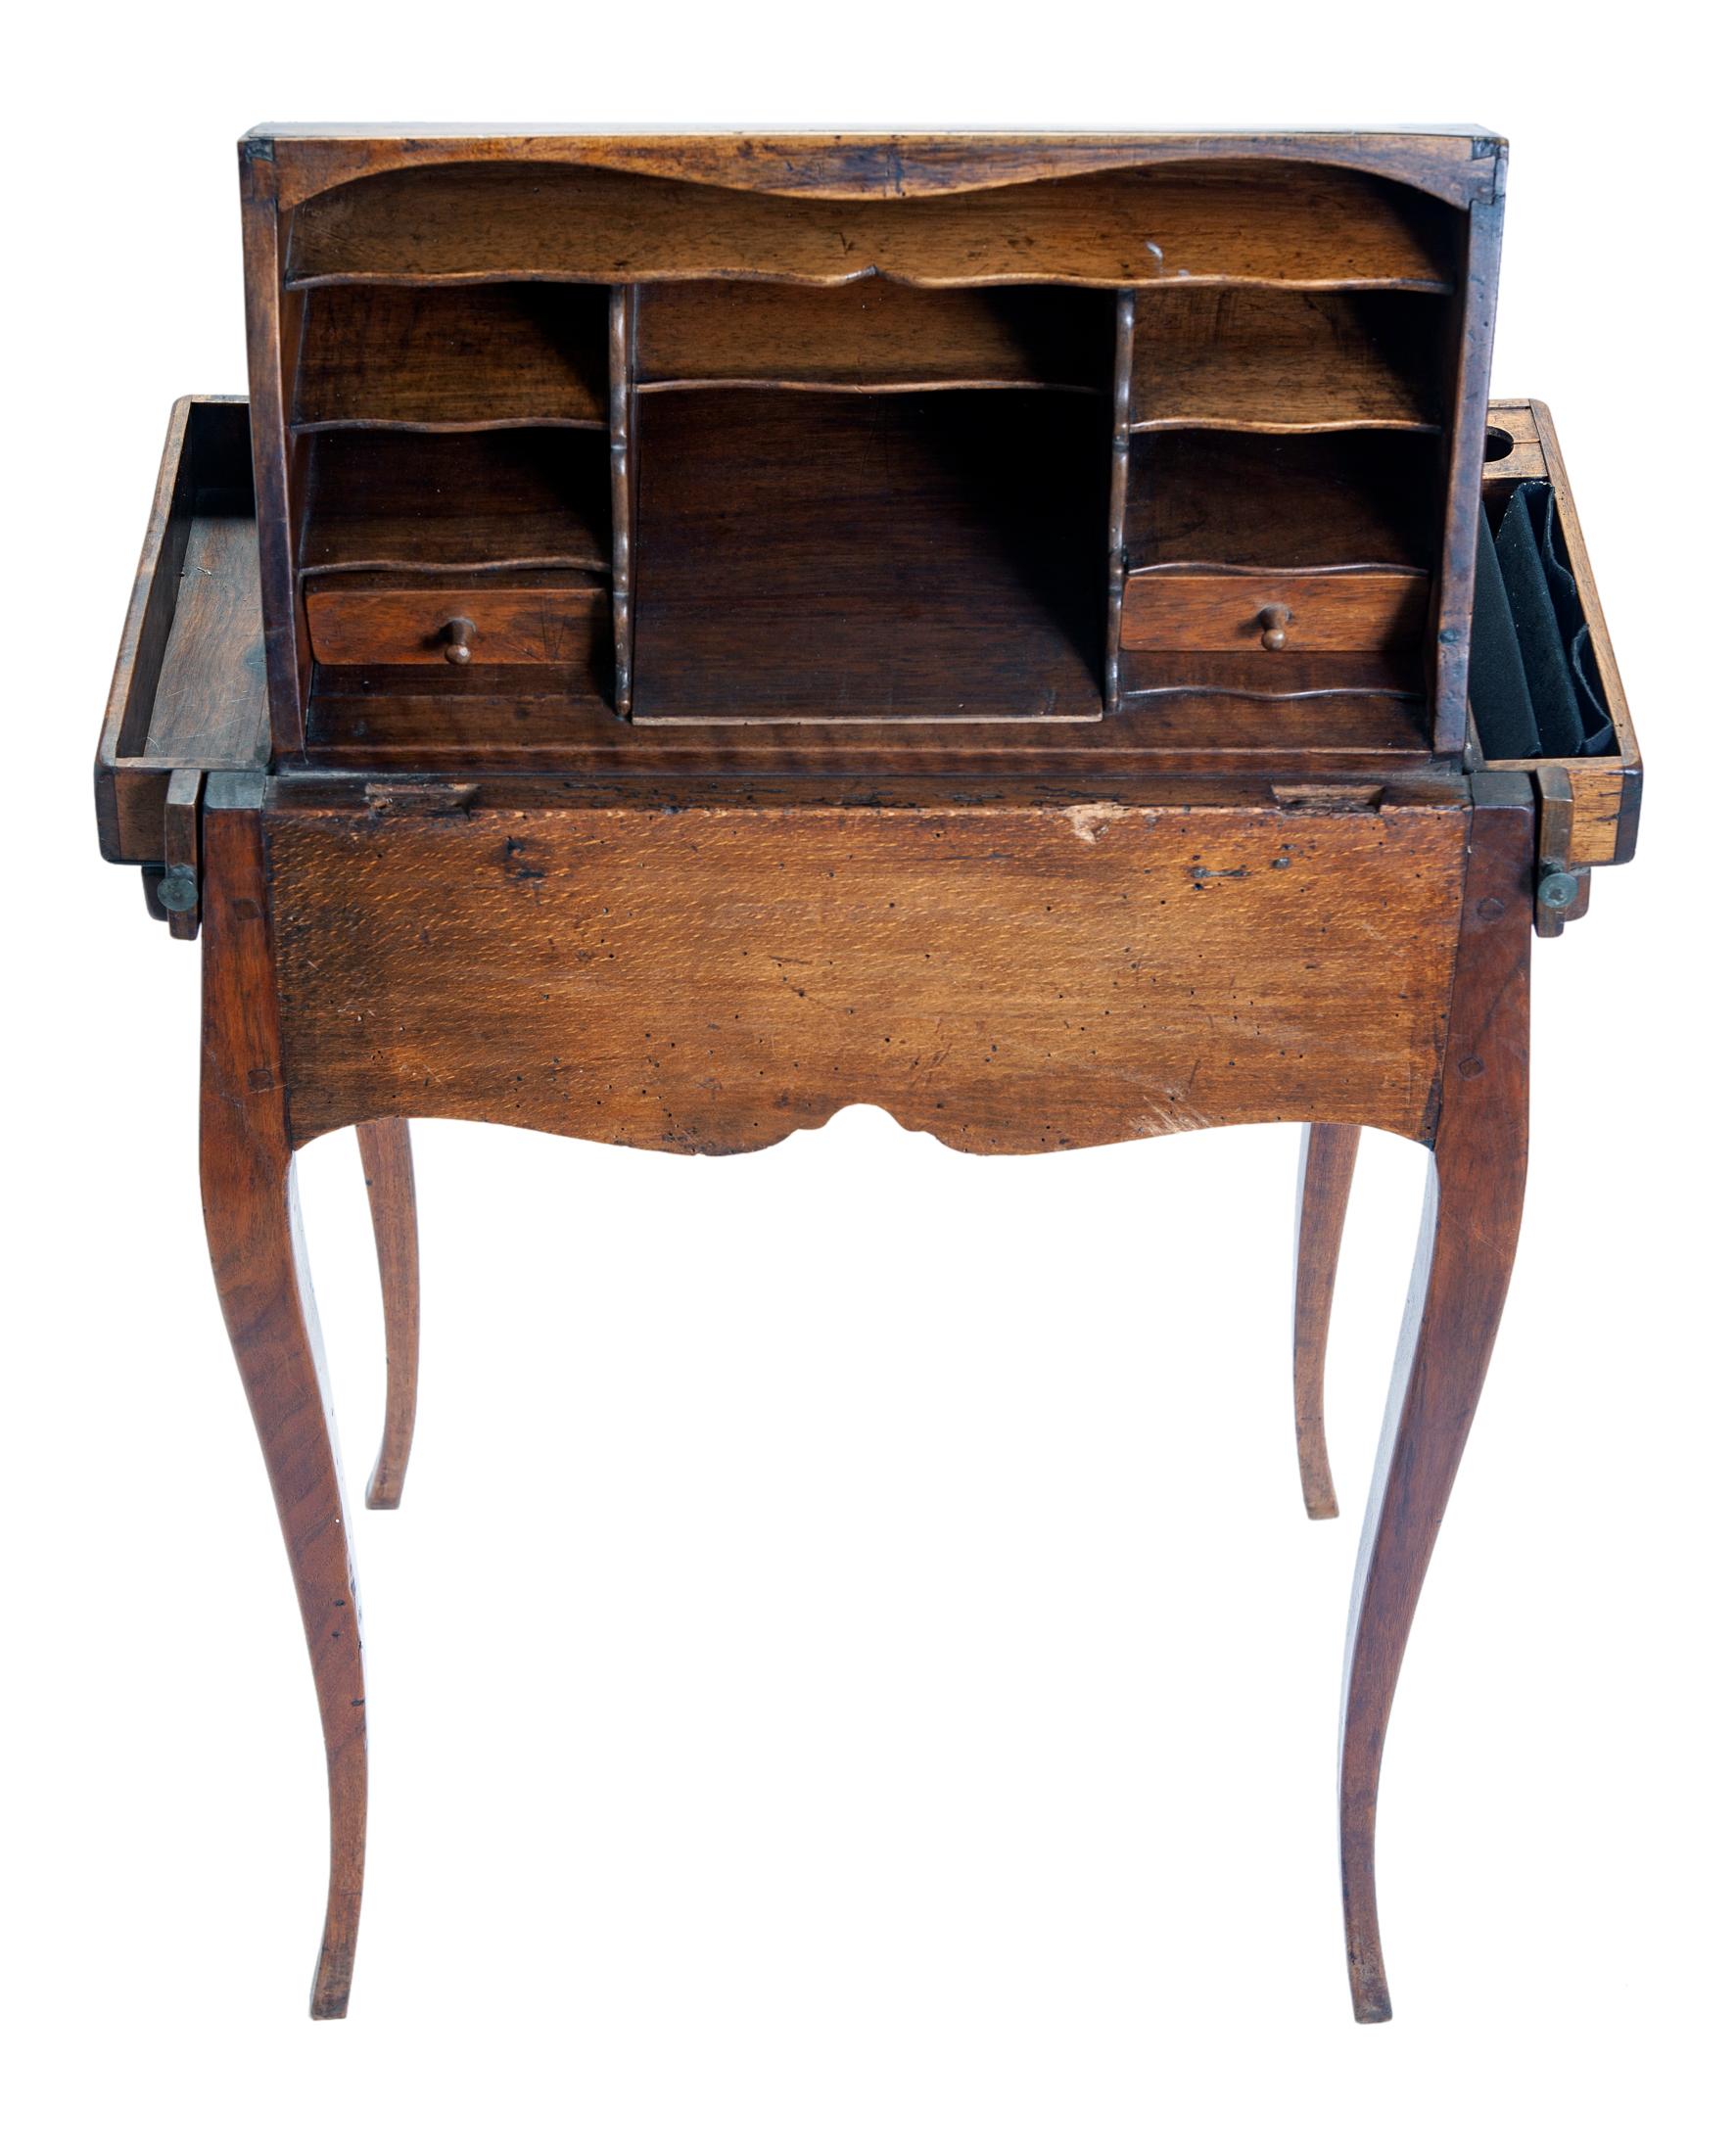 This petite secrétaire is perfect for small spaces. Small drawers with original hardware and multiple shelves are perfect to hold writing paper, notes, and small collectibles. The curved back makes it pleasing to look at from any angle. Pencil trays